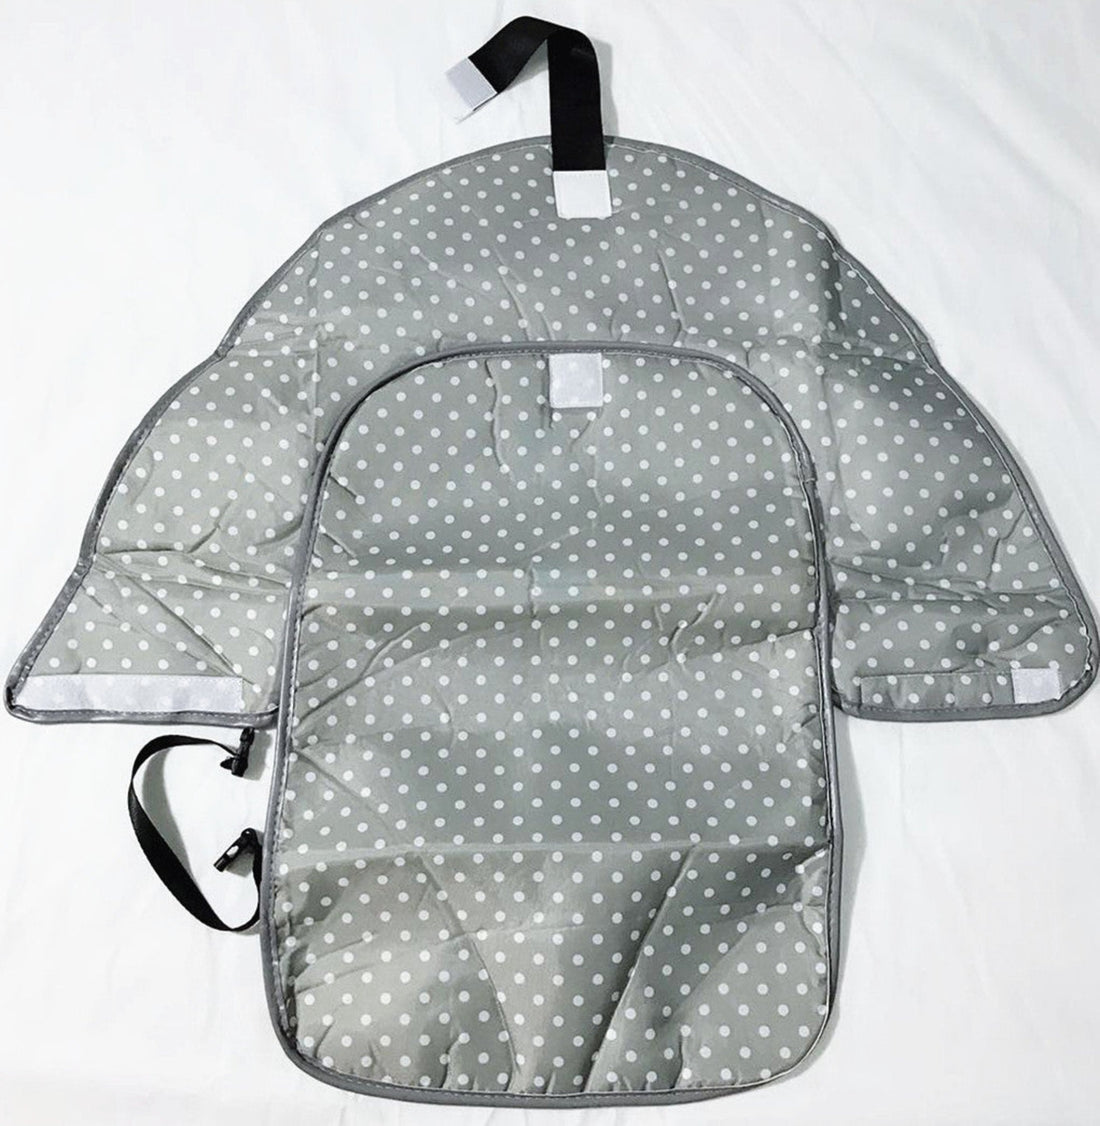 Portable changing pad fitting in diaper bag